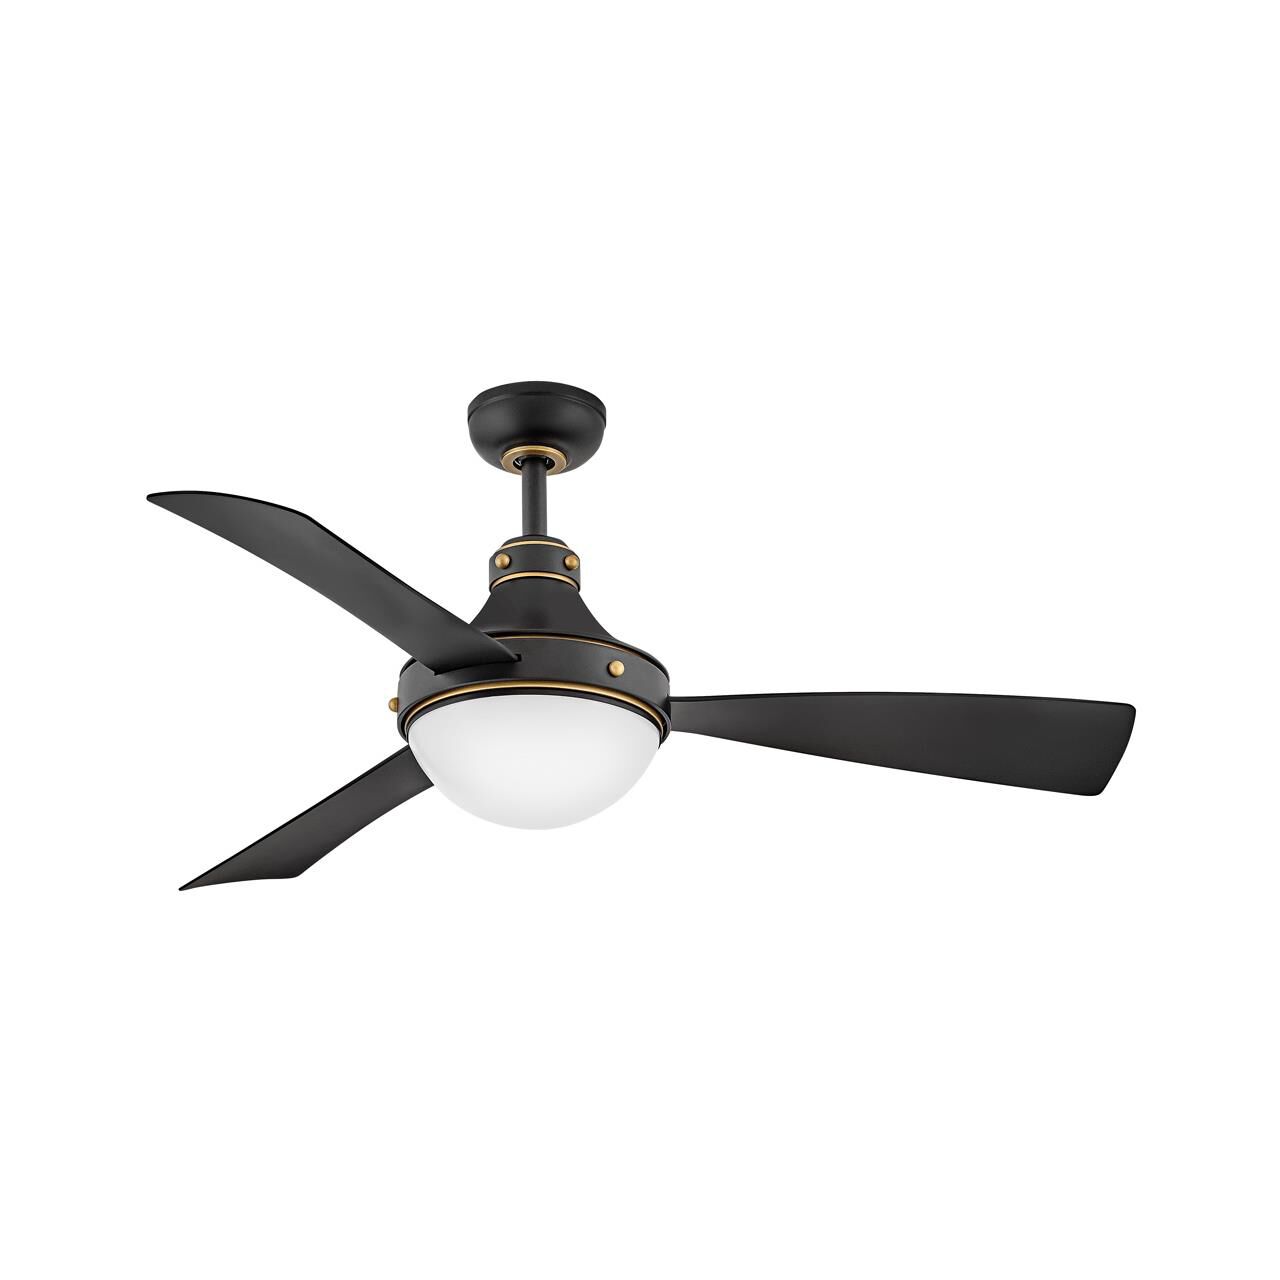 Photos - Fan Hinkley Lighting Oliver Outdoor Rated 50 Inch Ceiling  with Light Kit O 